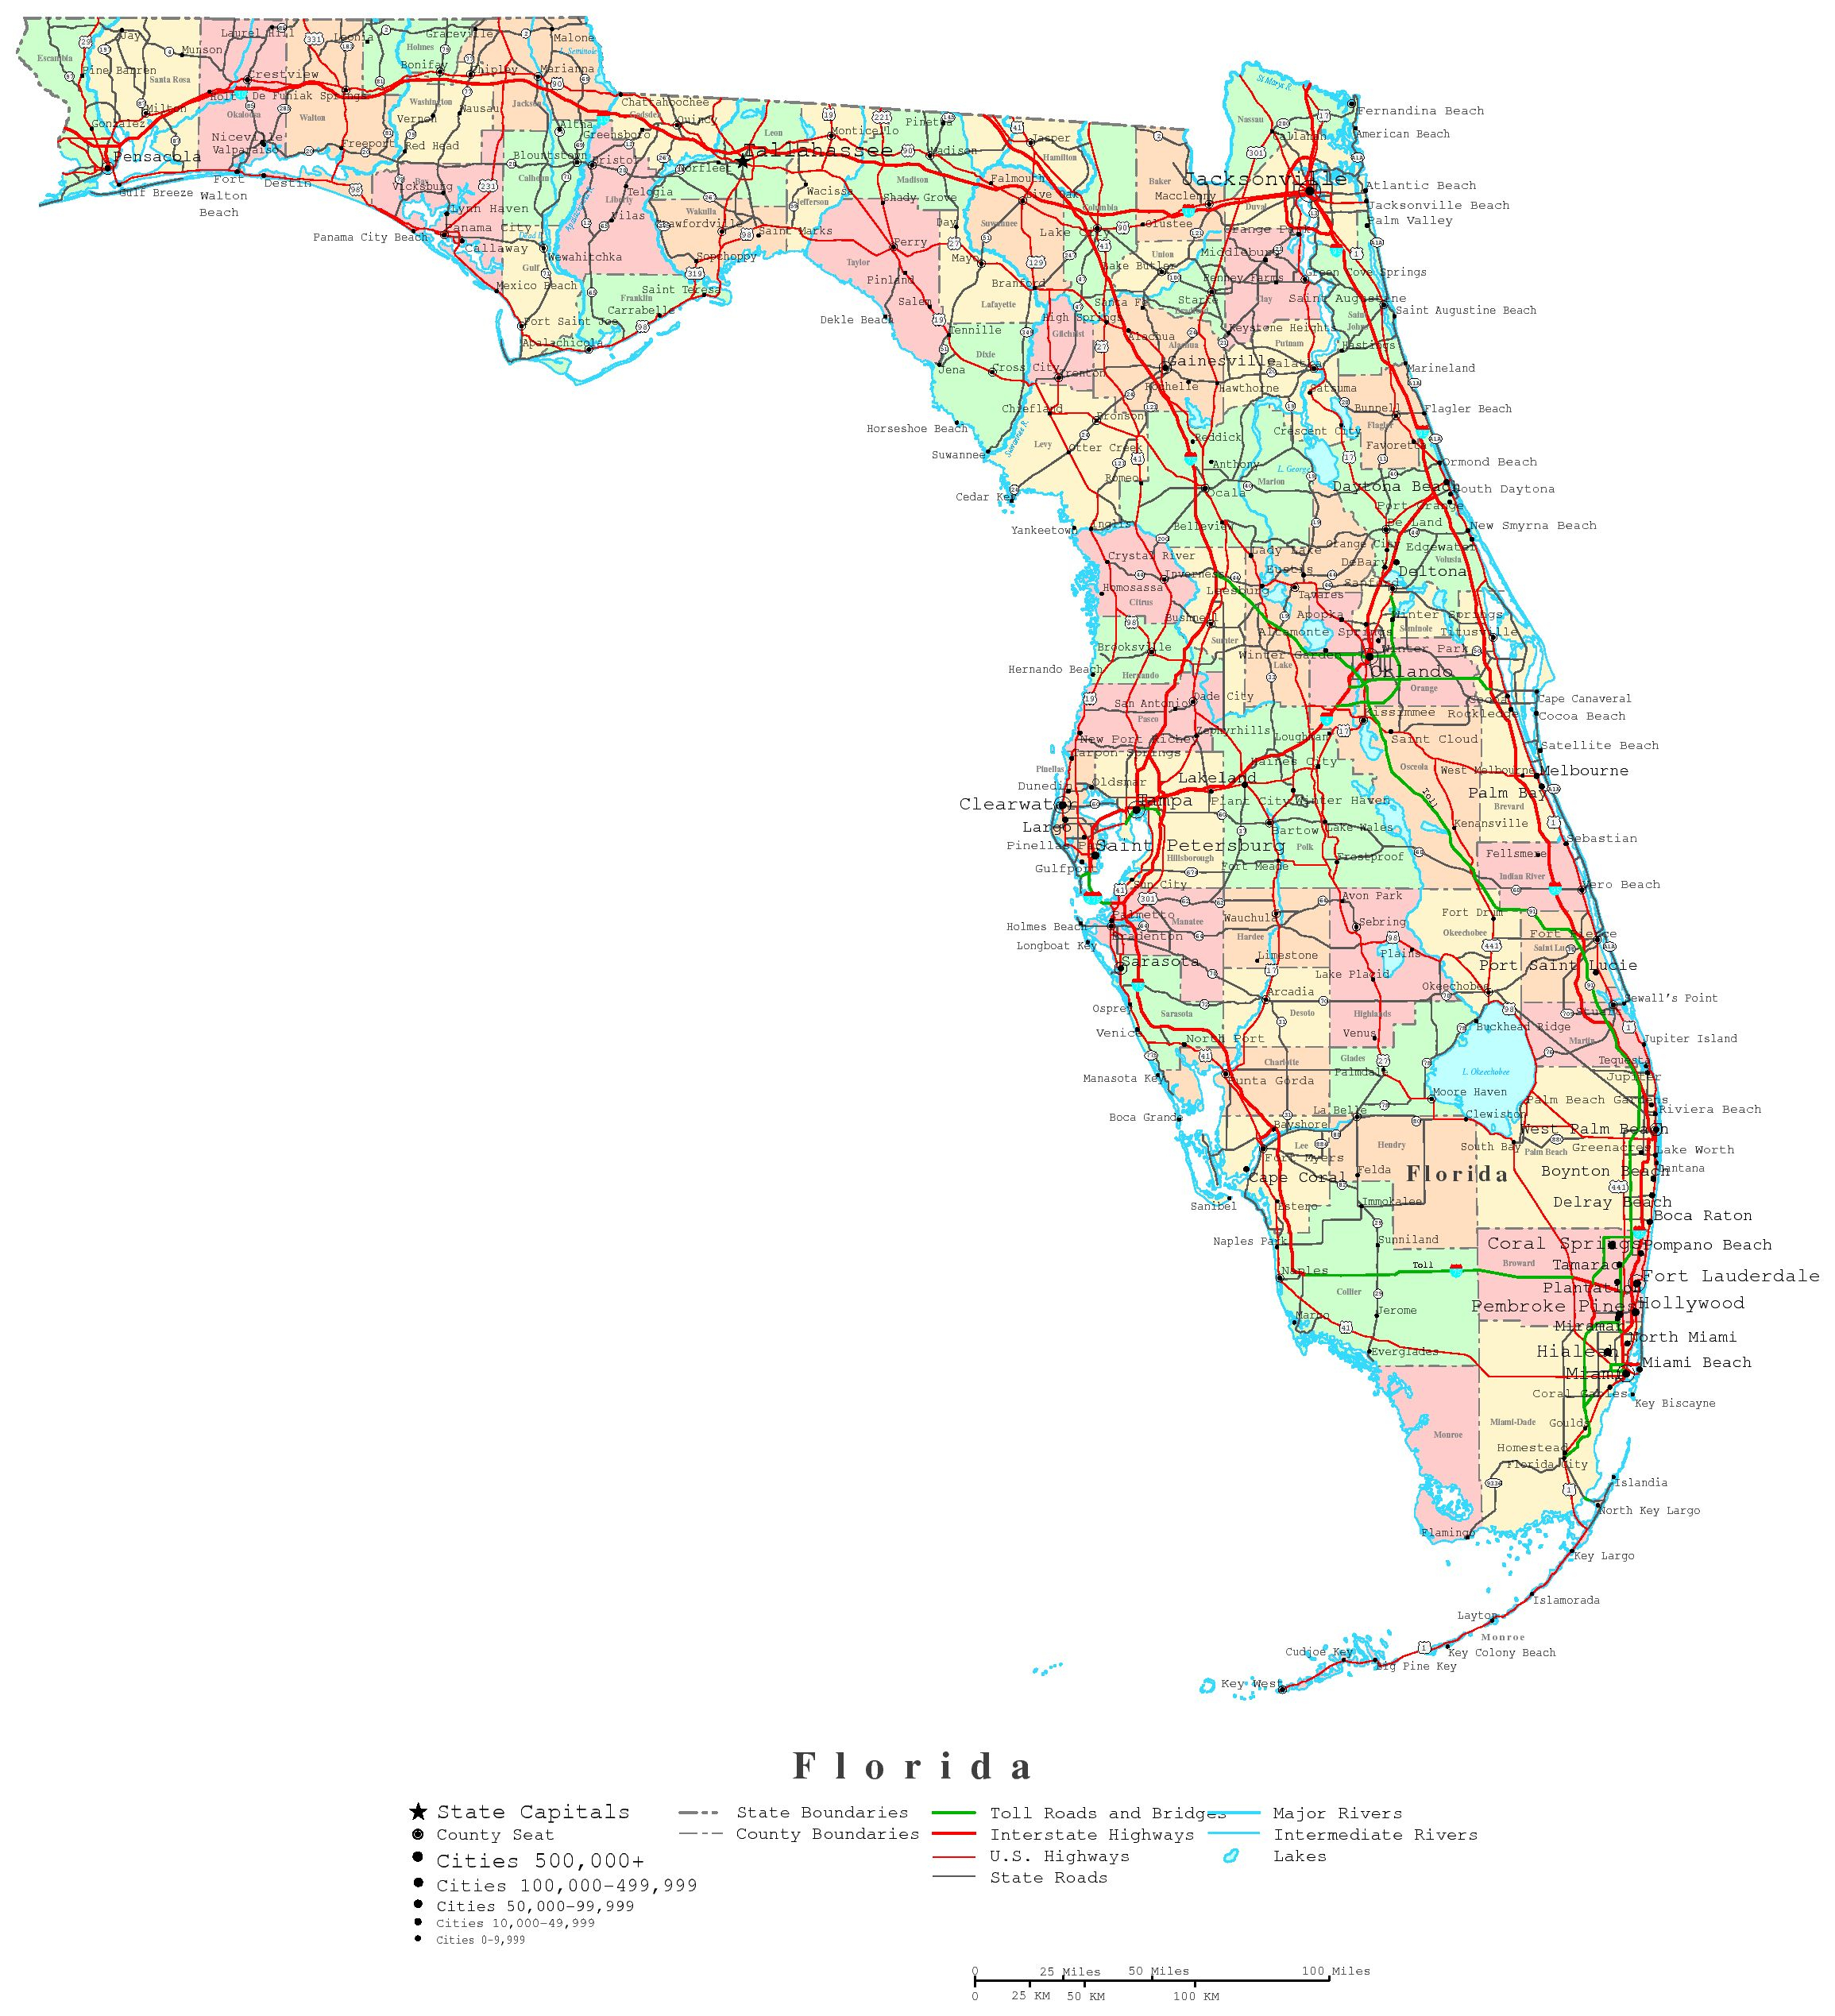 Florida Map - Online Maps Of Florida State - Interactive Florida County Map